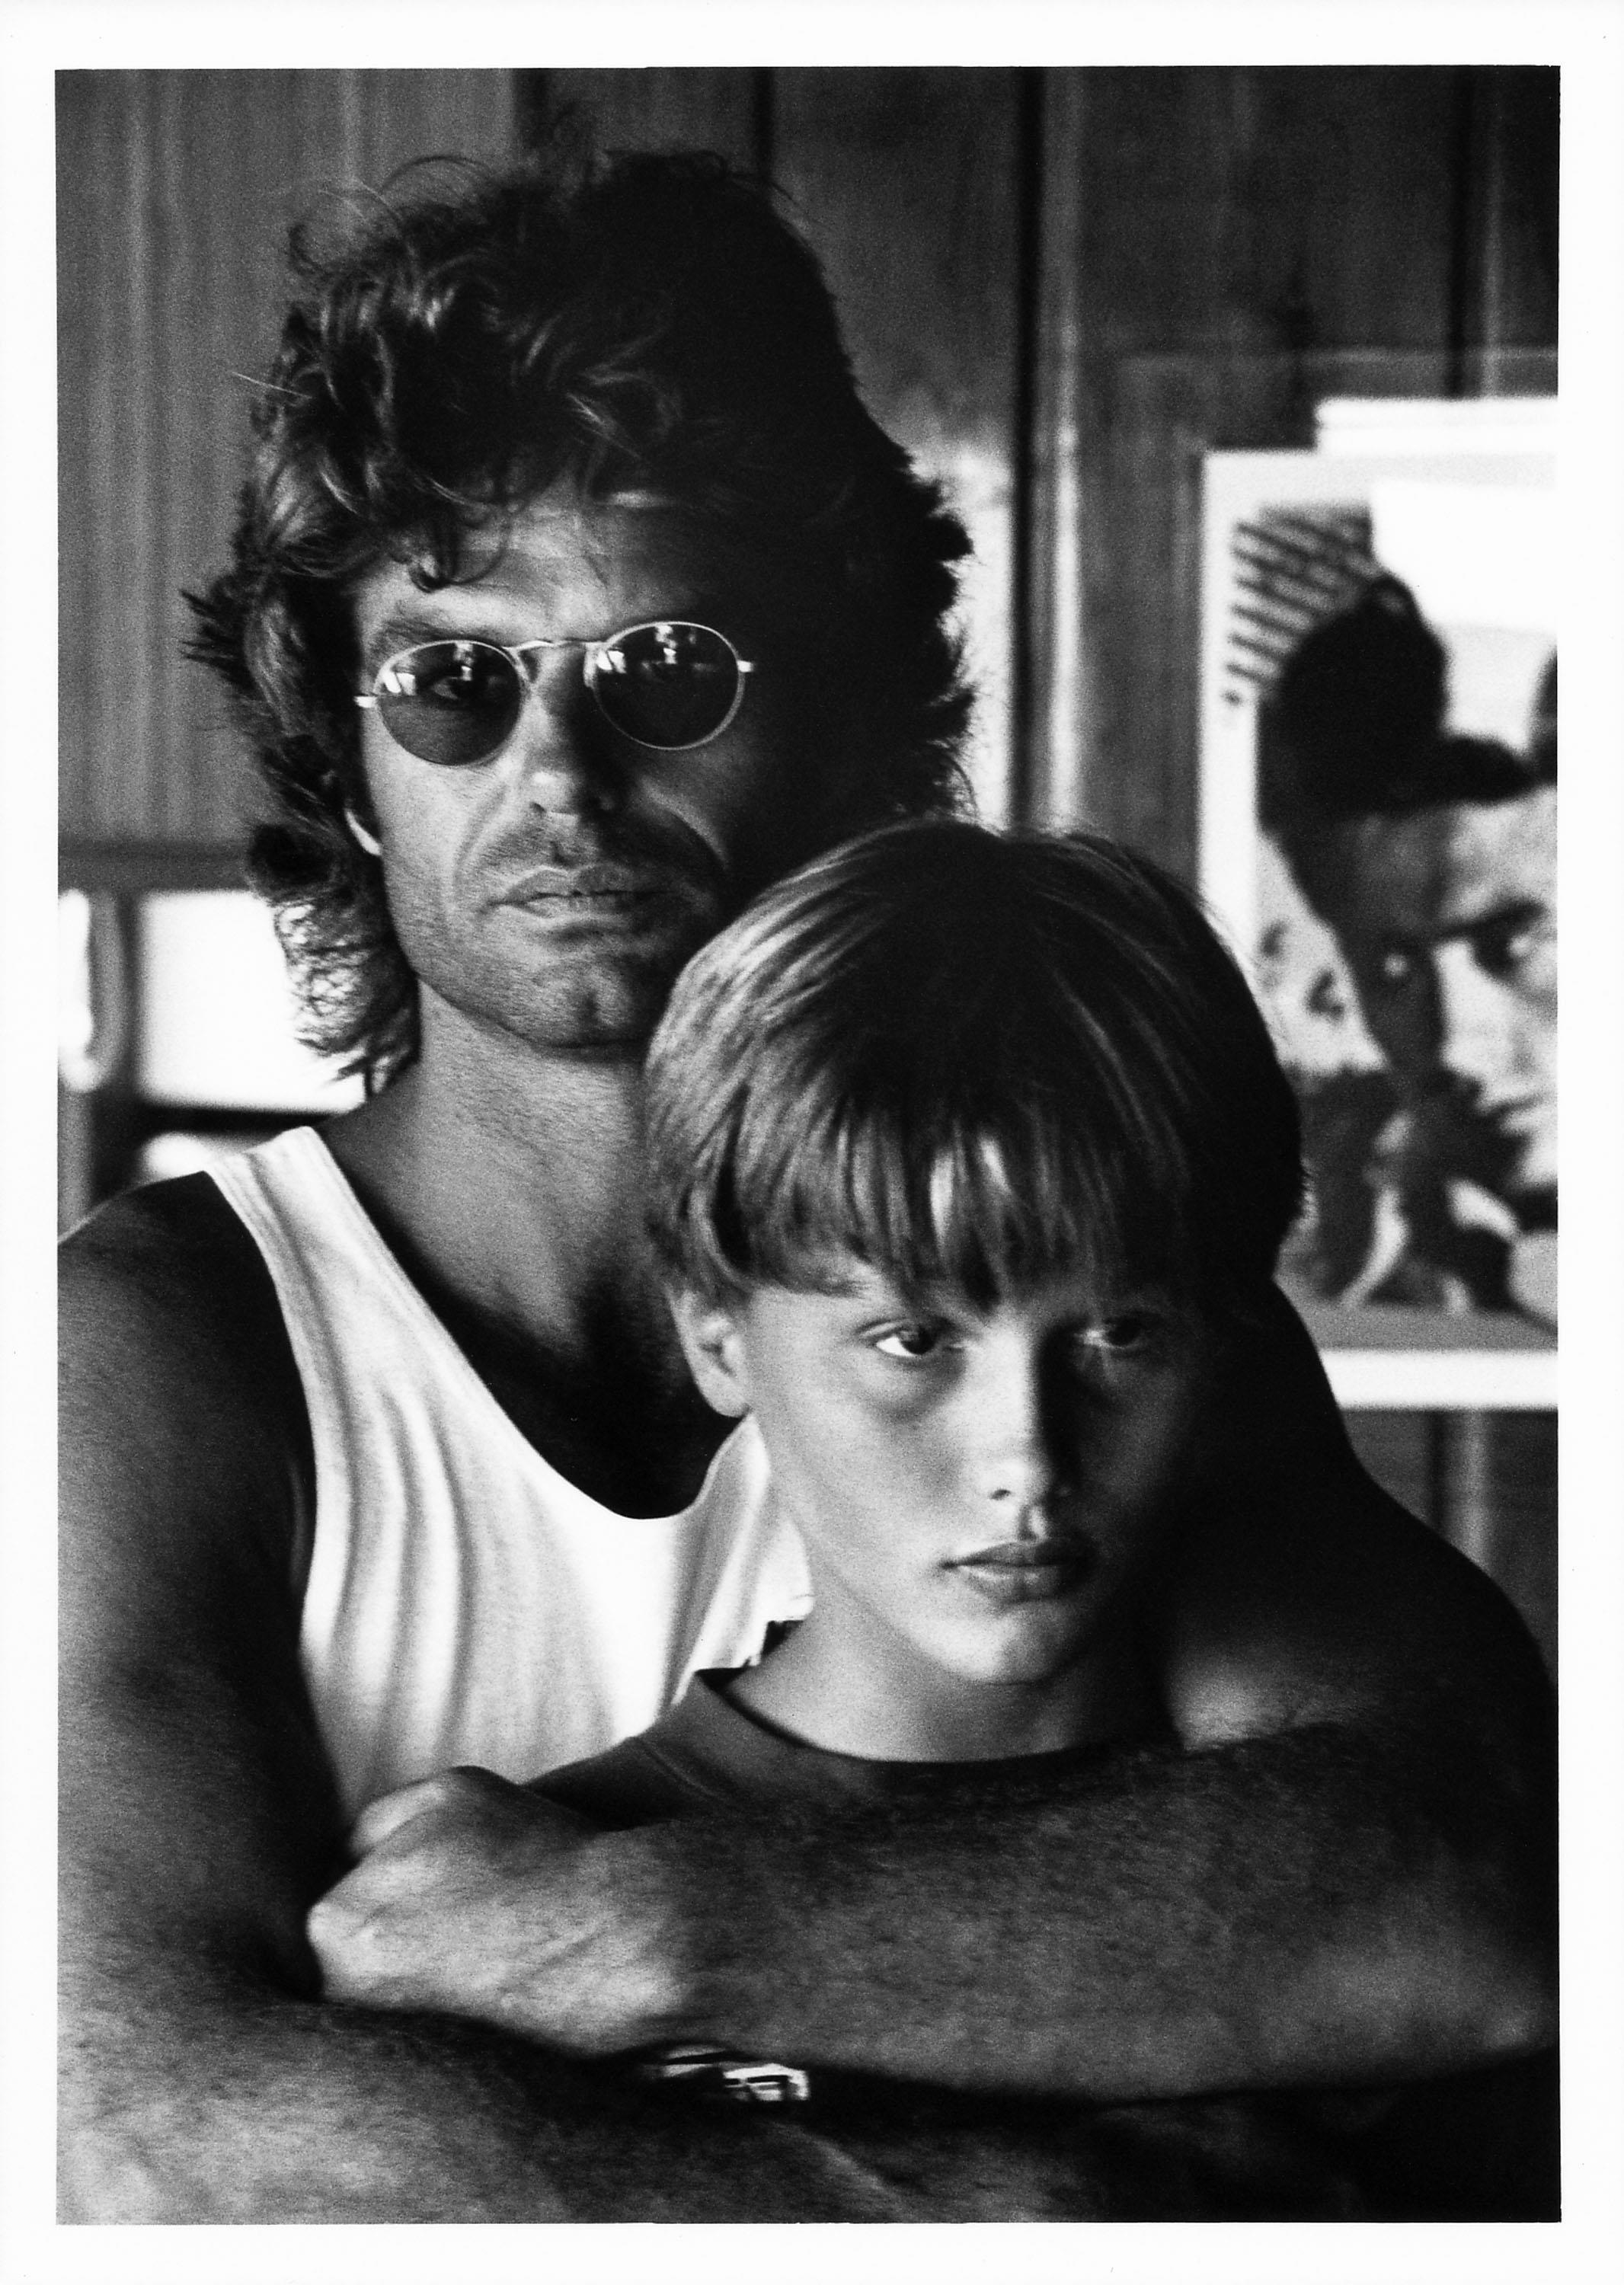 <p>Harry Hamlin welcomed son Dimitri with Swedish actress Ursula Andress after they began a relationship while co-starring in "Clash of the Titans." The "Mad Men" actor and his son are seen here in Malibu on Aug. 1, 1993, when Dimitri was 13.</p>